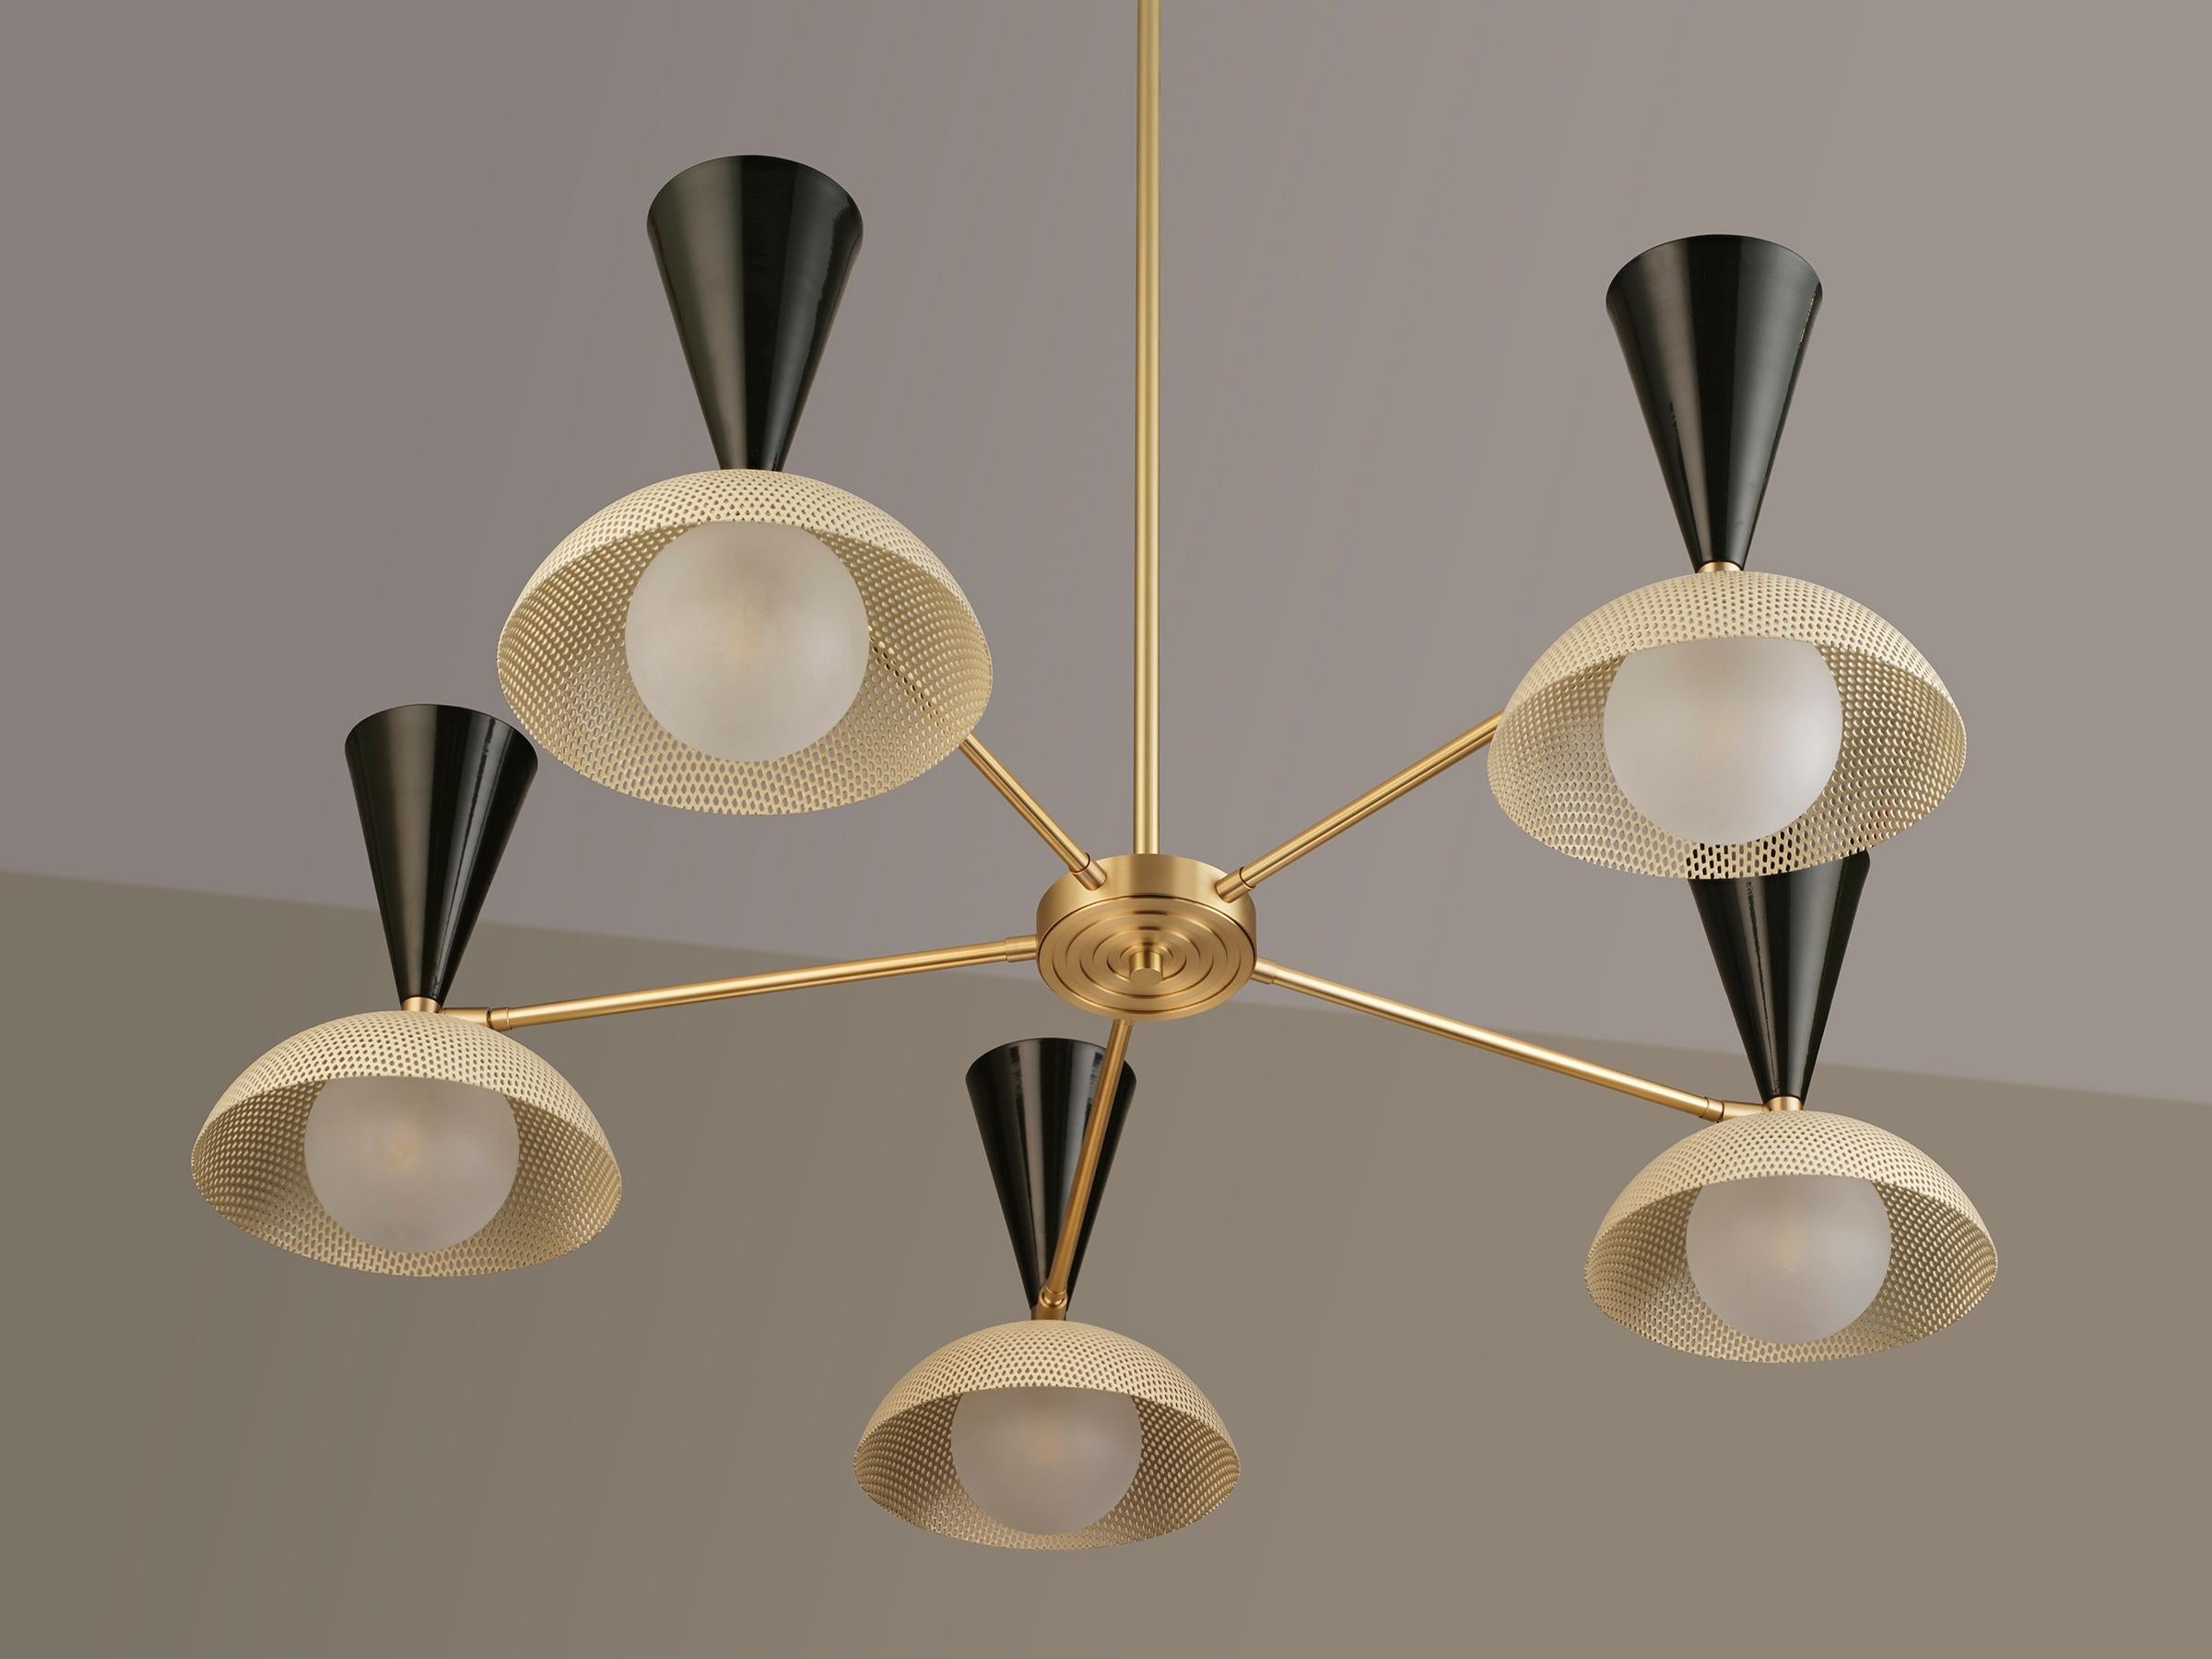 Powder-Coated Molto 5-Arm Ceiling Fixture in Brushed Brass + Enameled Mesh, Blueprint Lighting